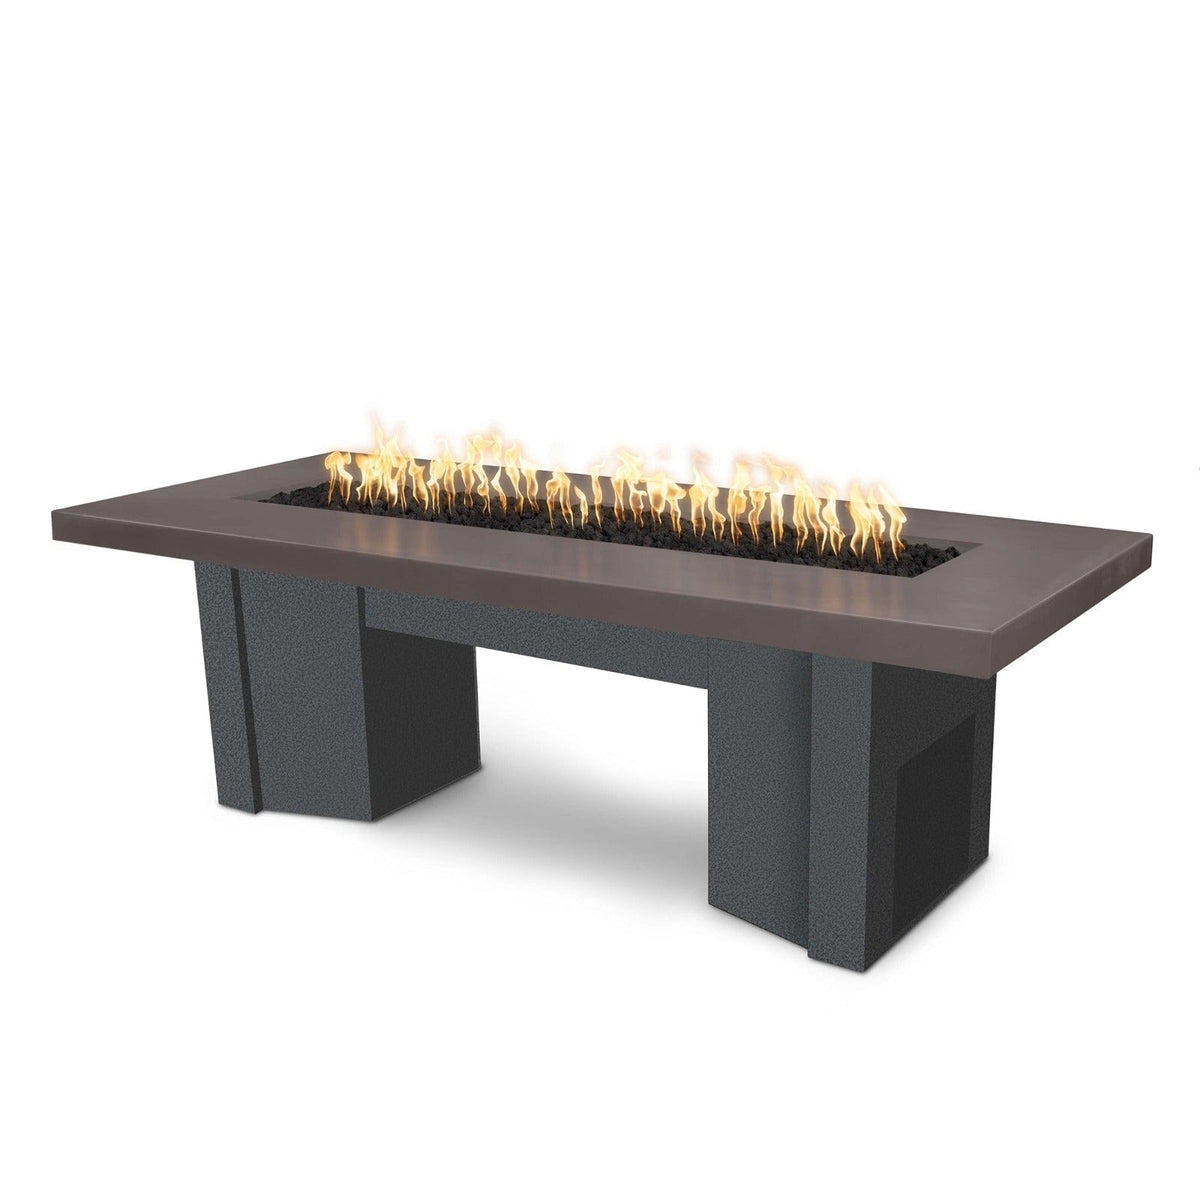 The Outdoor Plus Fire Features Chestnut (-CST) / Silver Vein Powder Coated Steel (-SLV) The Outdoor Plus 60&quot; Alameda Fire Table Smooth Concrete in Natural Gas - 110V Plug &amp; Play Electronic Ignition / OPT-ALMGFRC60EKIT-NG